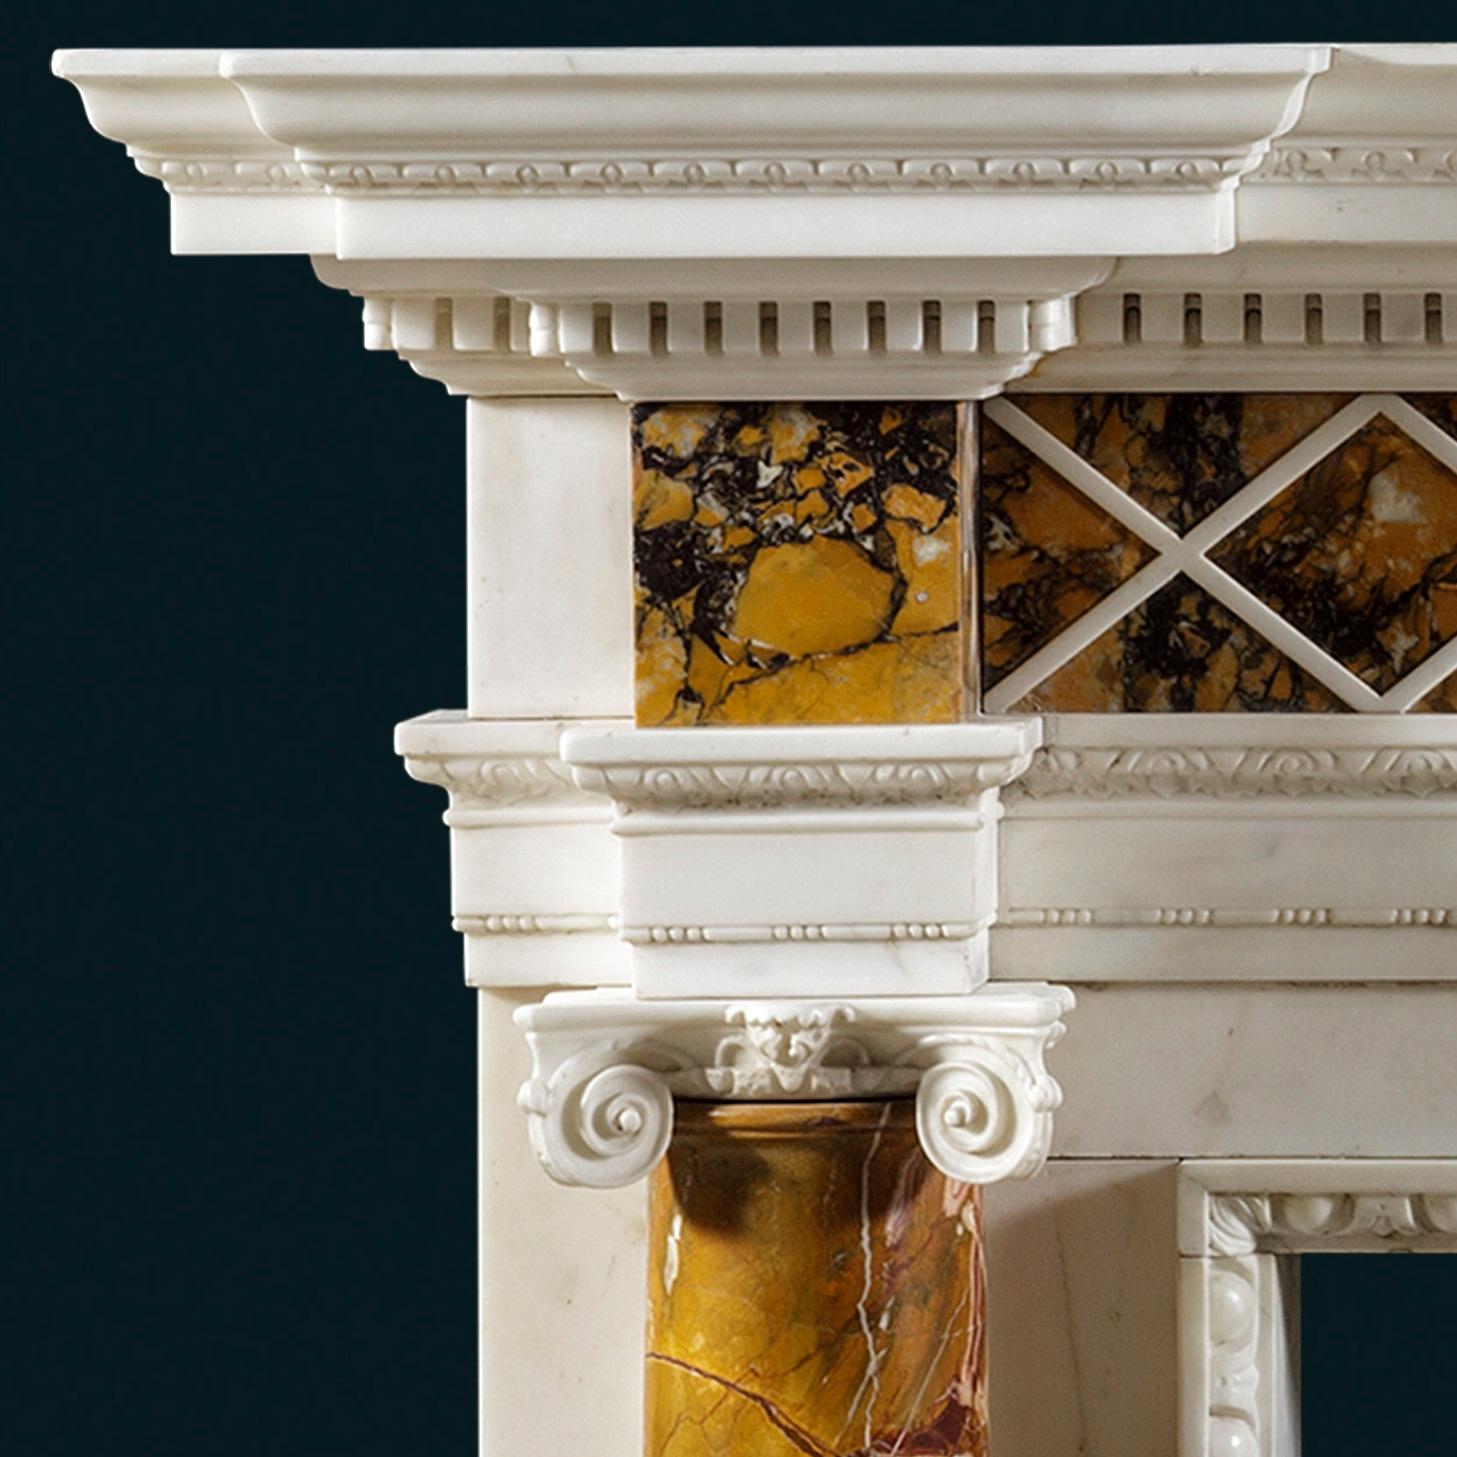 A George III, chimney piece in statuary, sienna and jasper marbles with a large and well-carved centre tablet of Virtue and Vice, circa 1765.
The breakfront tiered shelf with foliate and dentil decorated mouldings. Virtue is depicted as a sphinx,